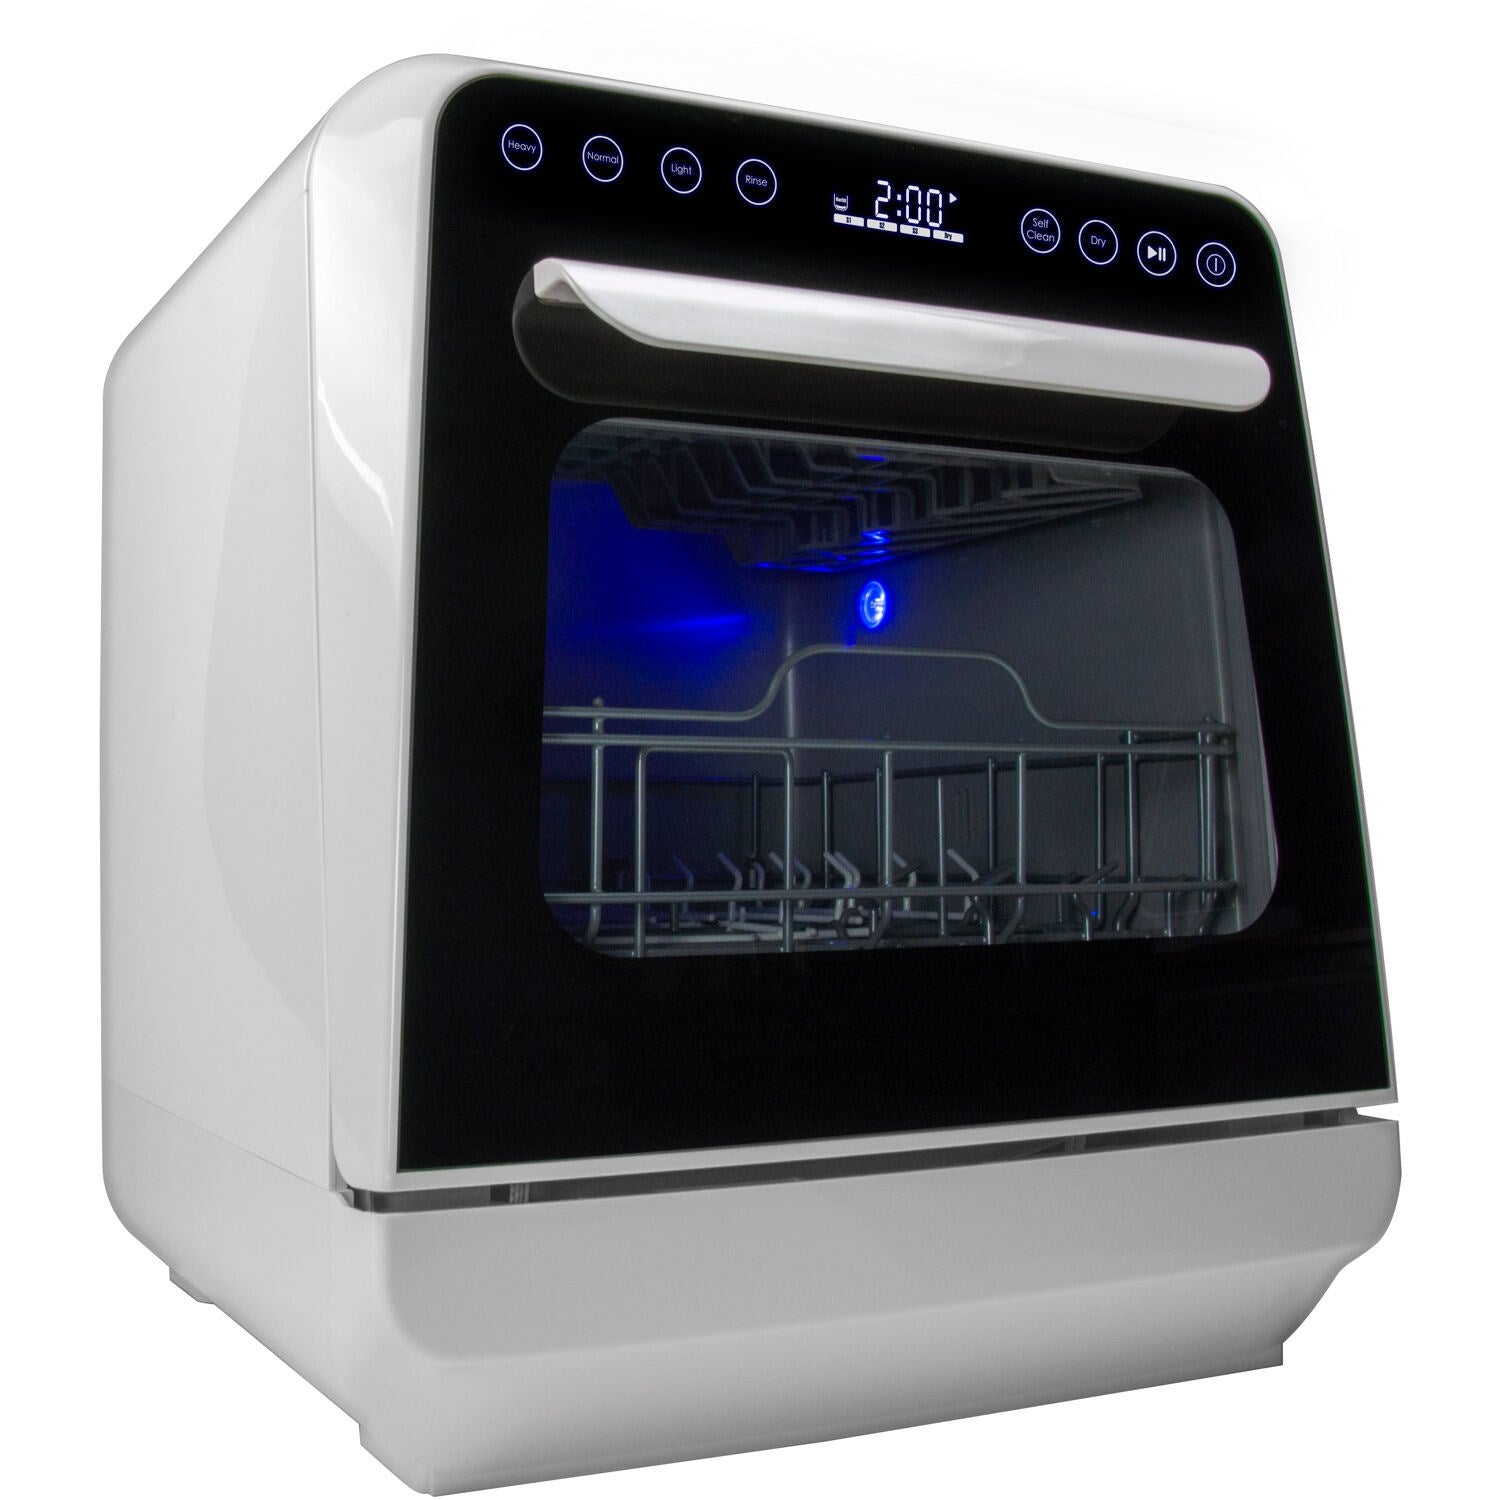 Magic Chef - 3-Place Setting Coutertop Dishwasher, 5 Programs, Built-In Water Tank | MCSCD3W